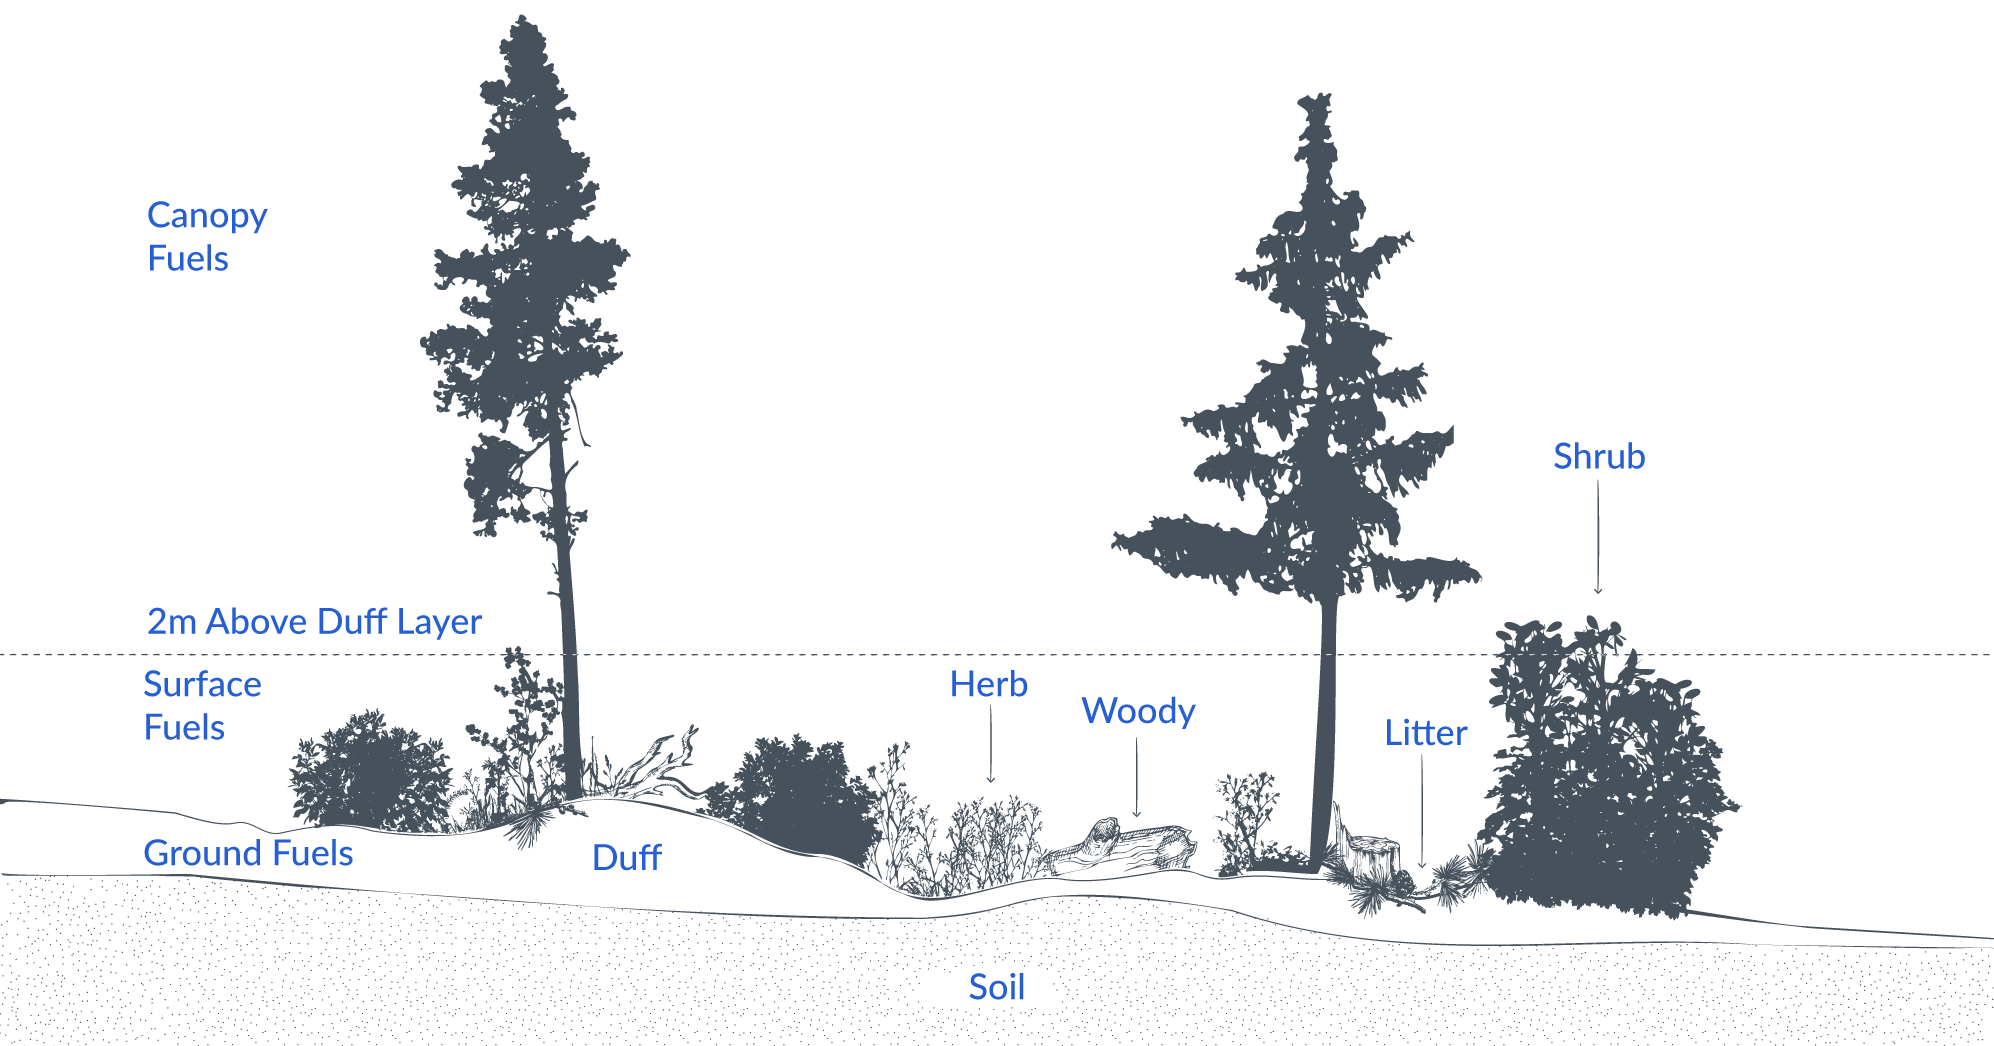 Diagram identifying the different fuels of a forest (canopy, above duff, ground, etc).